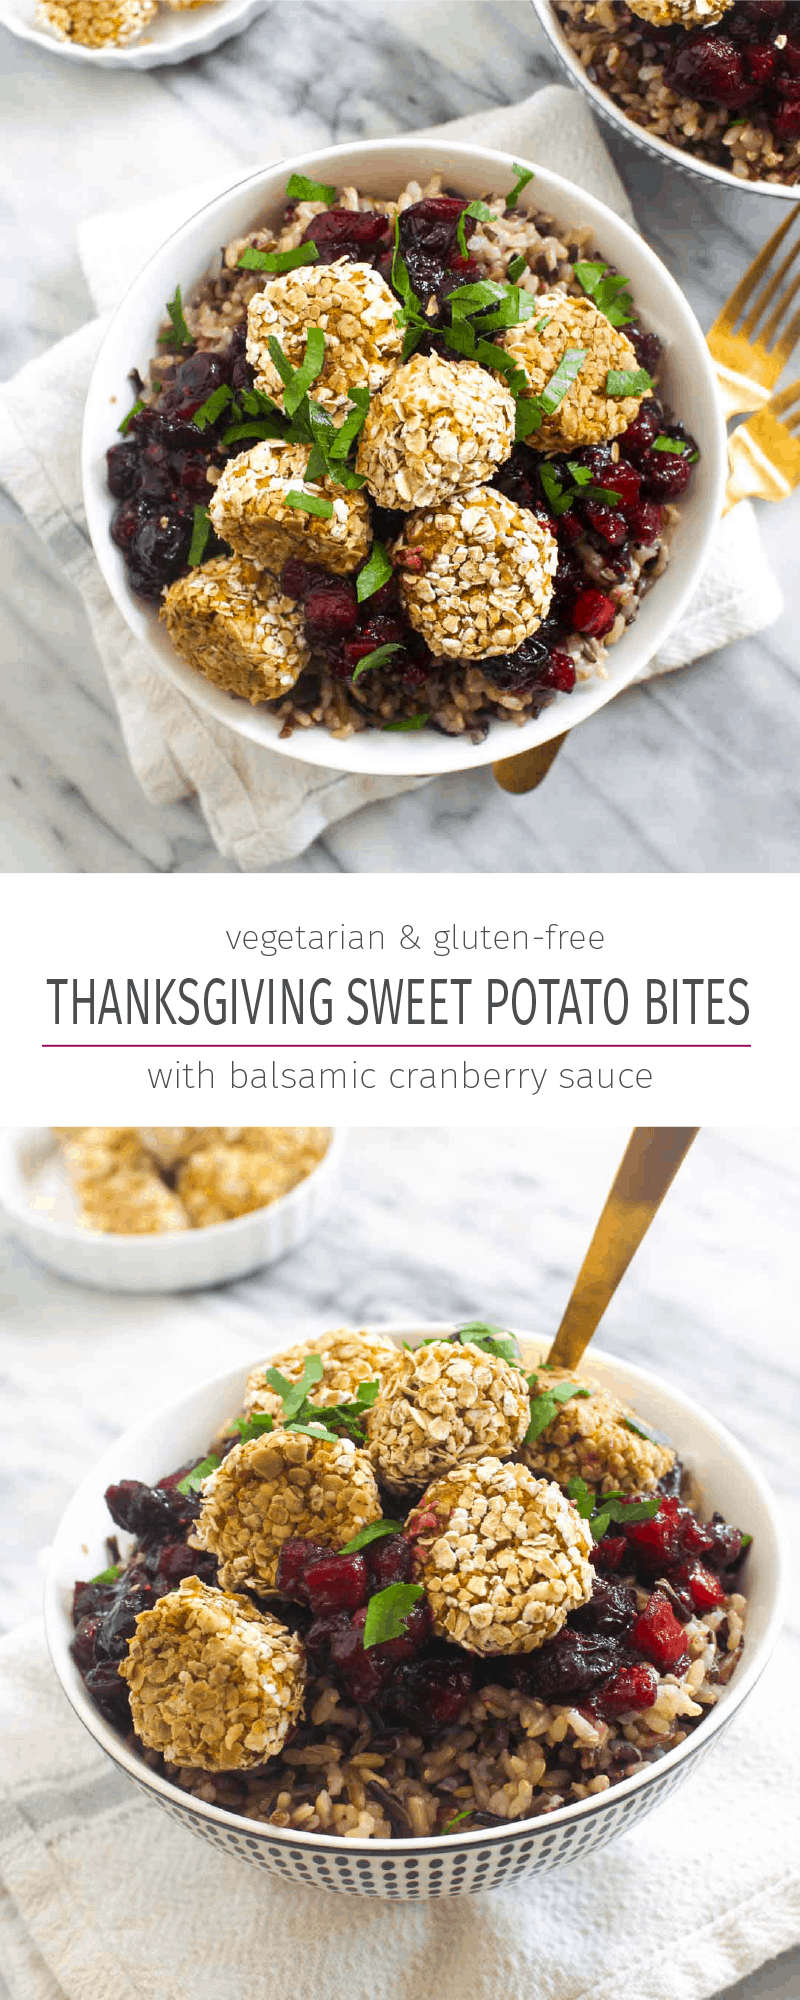 Sweet potato bites with cranberry balsamic glaze for thanksgiving collage